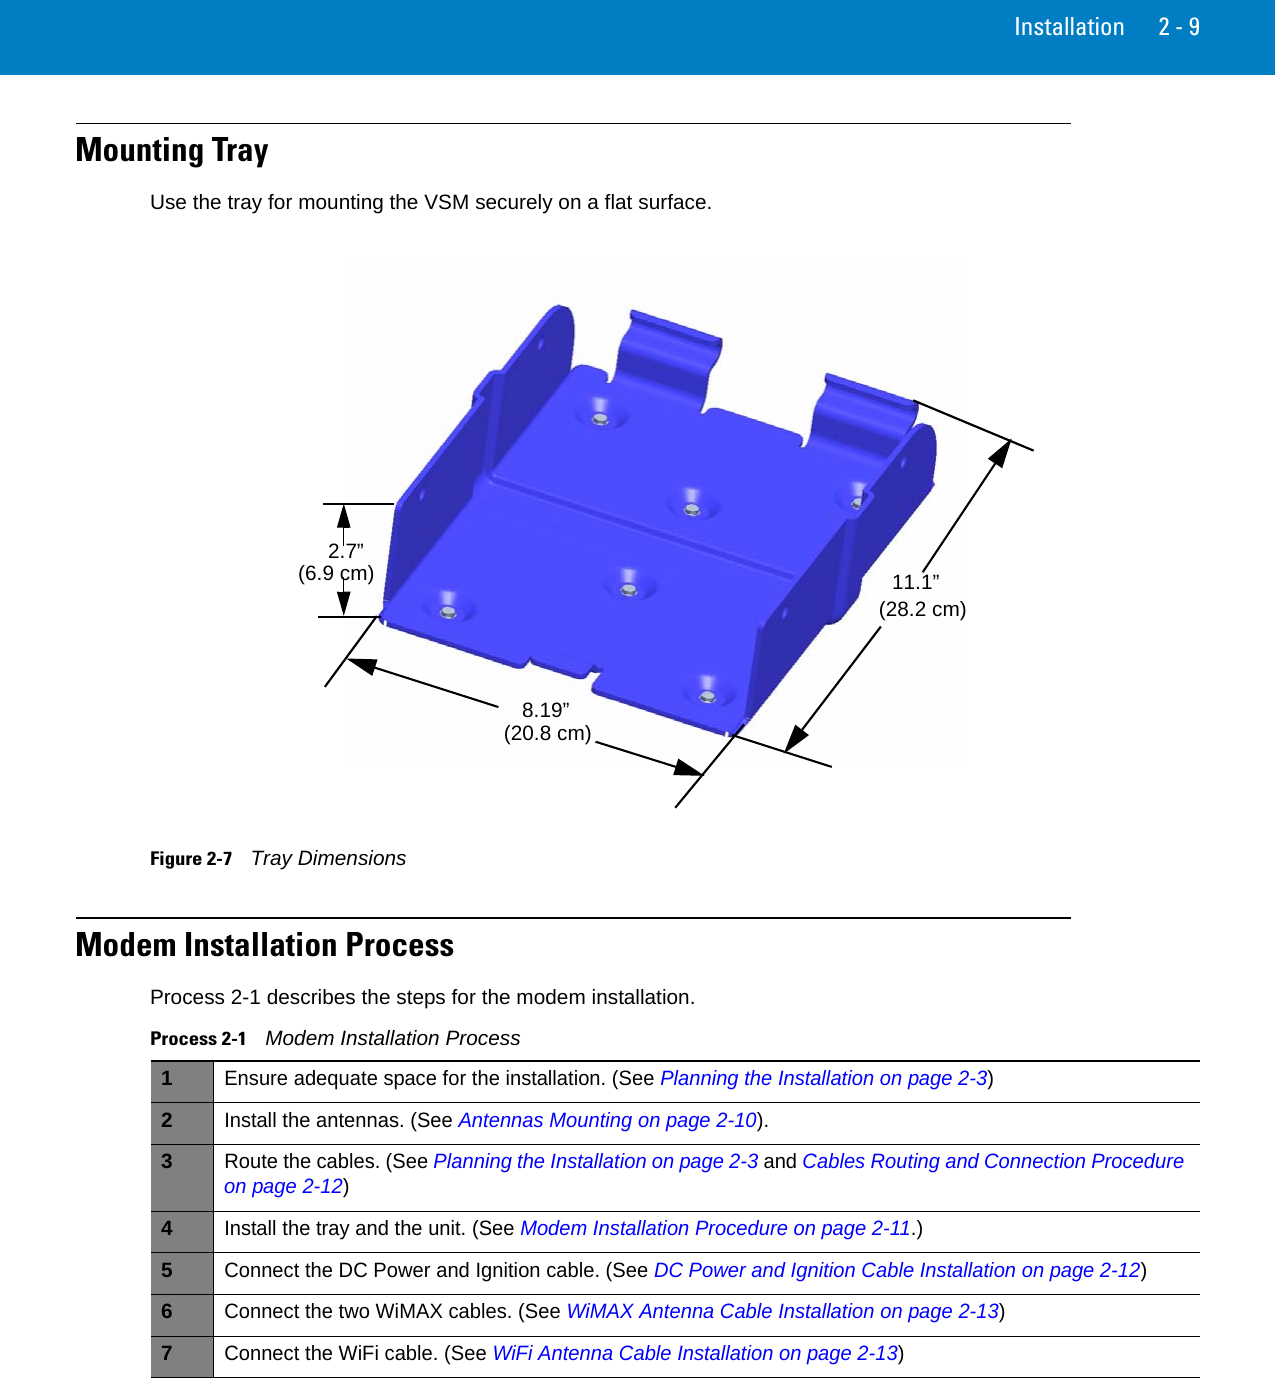 Installation 2 - 9Mounting TrayUse the tray for mounting the VSM securely on a flat surface.Figure 2-7    Tray DimensionsModem Installation ProcessProcess 2-1 describes the steps for the modem installation.11.1”(28.2 cm)8.19”(20.8 cm)2.7”(6.9 cm)Process 2-1    Modem Installation Process 1Ensure adequate space for the installation. (See Planning the Installation on page 2-3)2Install the antennas. (See Antennas Mounting on page 2-10).3Route the cables. (See Planning the Installation on page 2-3 and Cables Routing and Connection Procedure on page 2-12)4Install the tray and the unit. (See Modem Installation Procedure on page 2-11.)5Connect the DC Power and Ignition cable. (See DC Power and Ignition Cable Installation on page 2-12)6Connect the two WiMAX cables. (See WiMAX Antenna Cable Installation on page 2-13)7Connect the WiFi cable. (See WiFi Antenna Cable Installation on page 2-13)